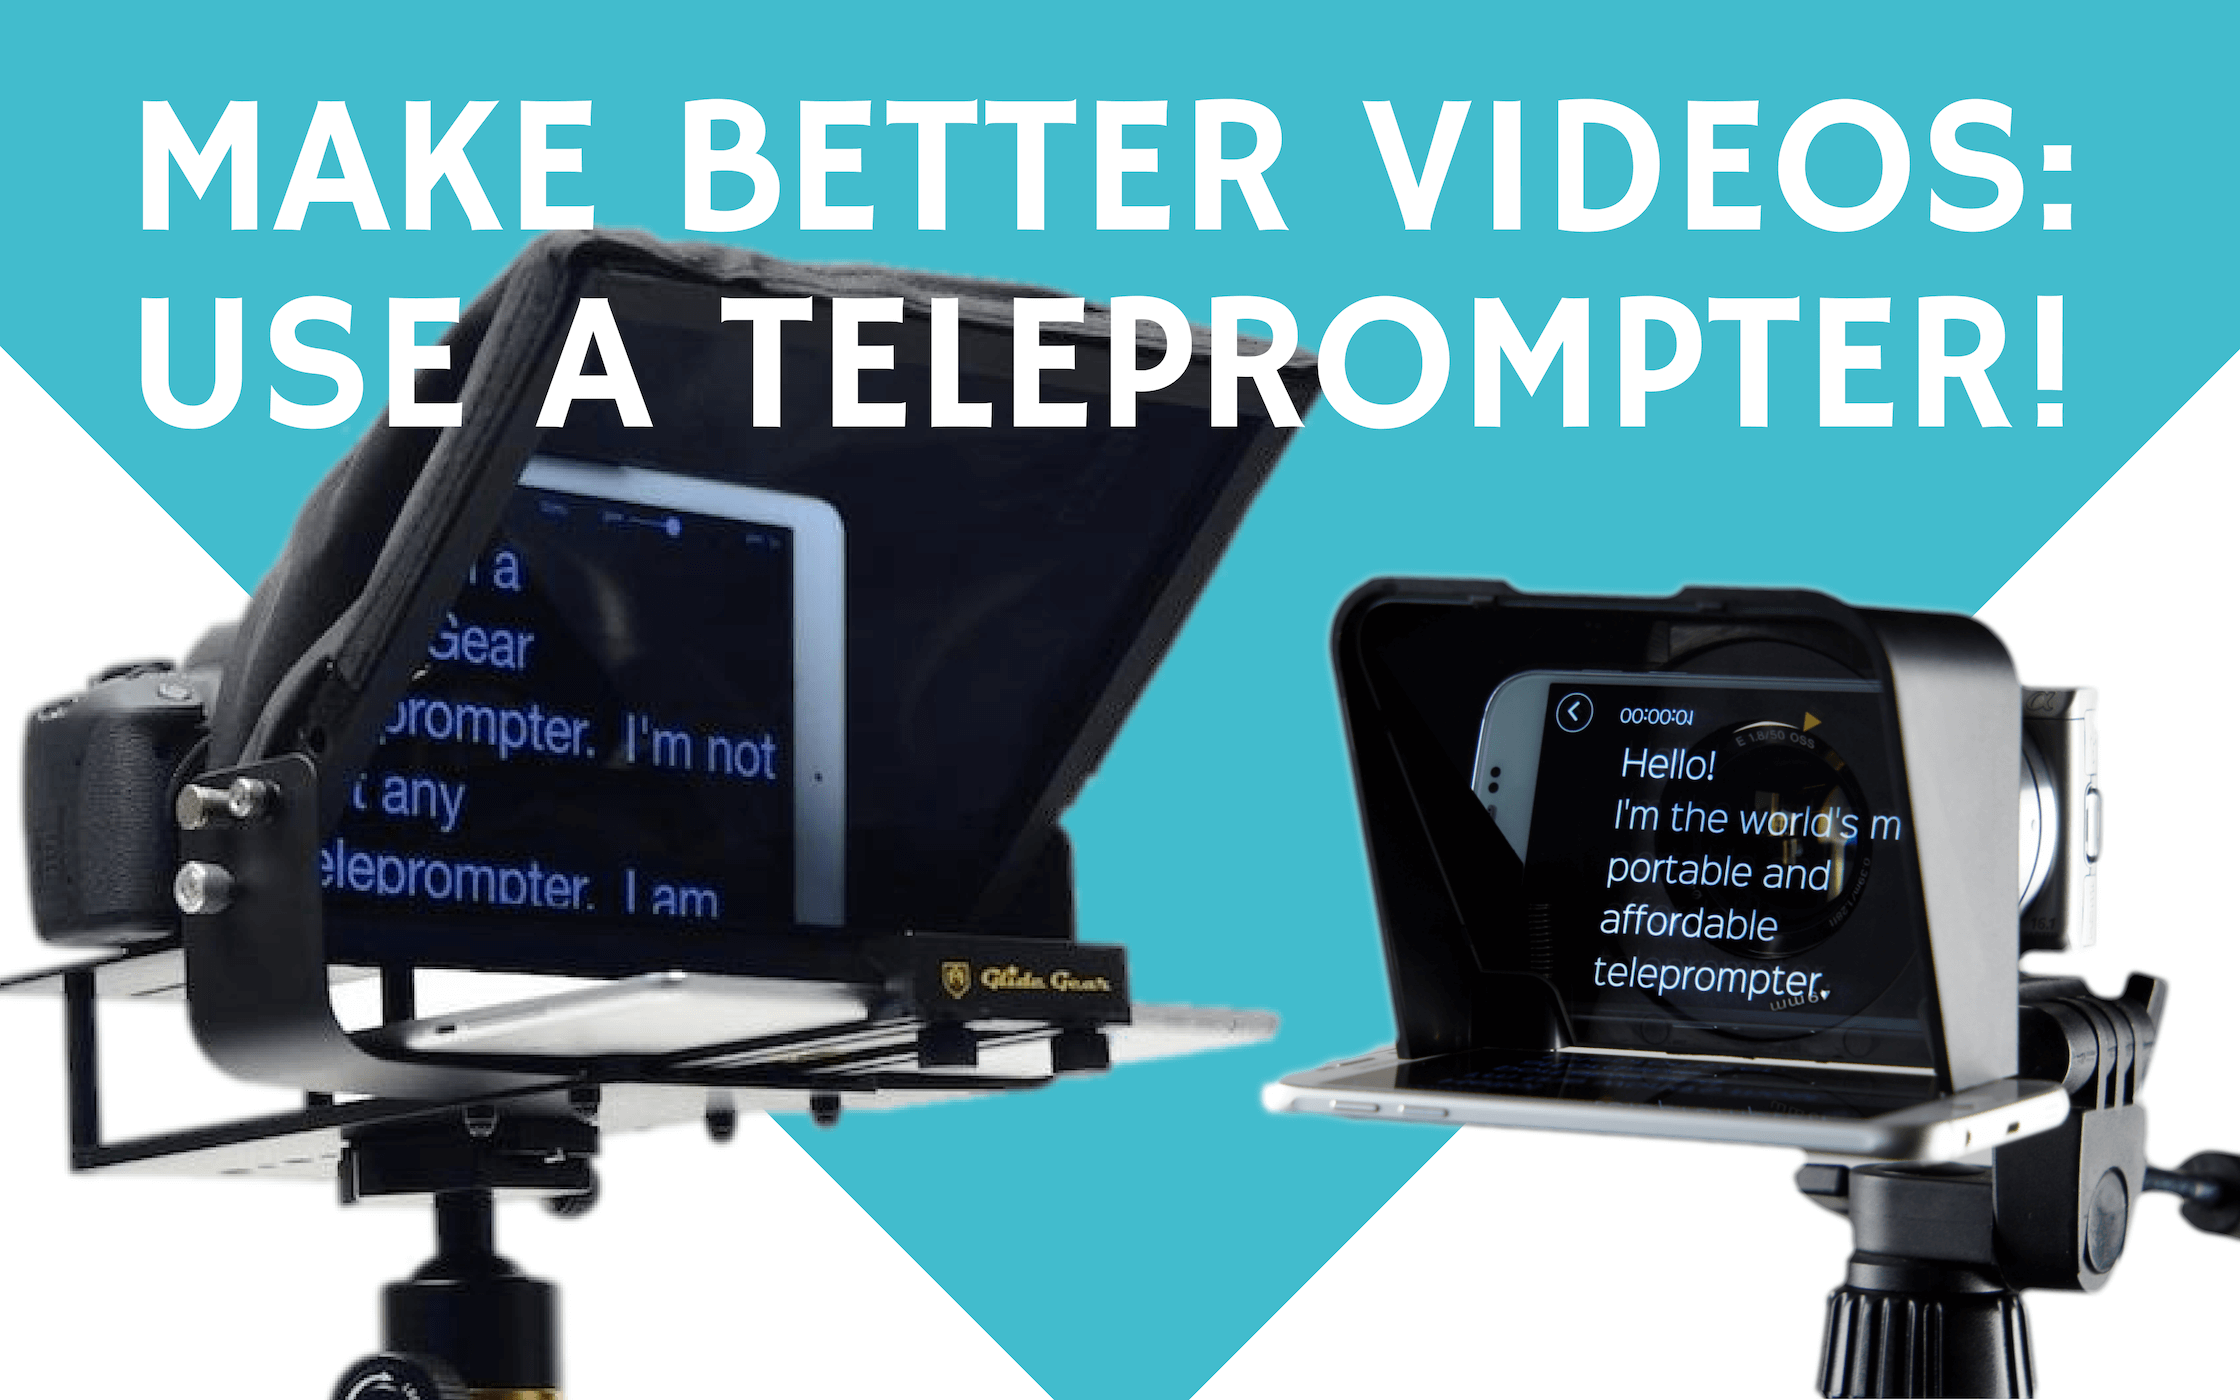 best teleprompter for mac